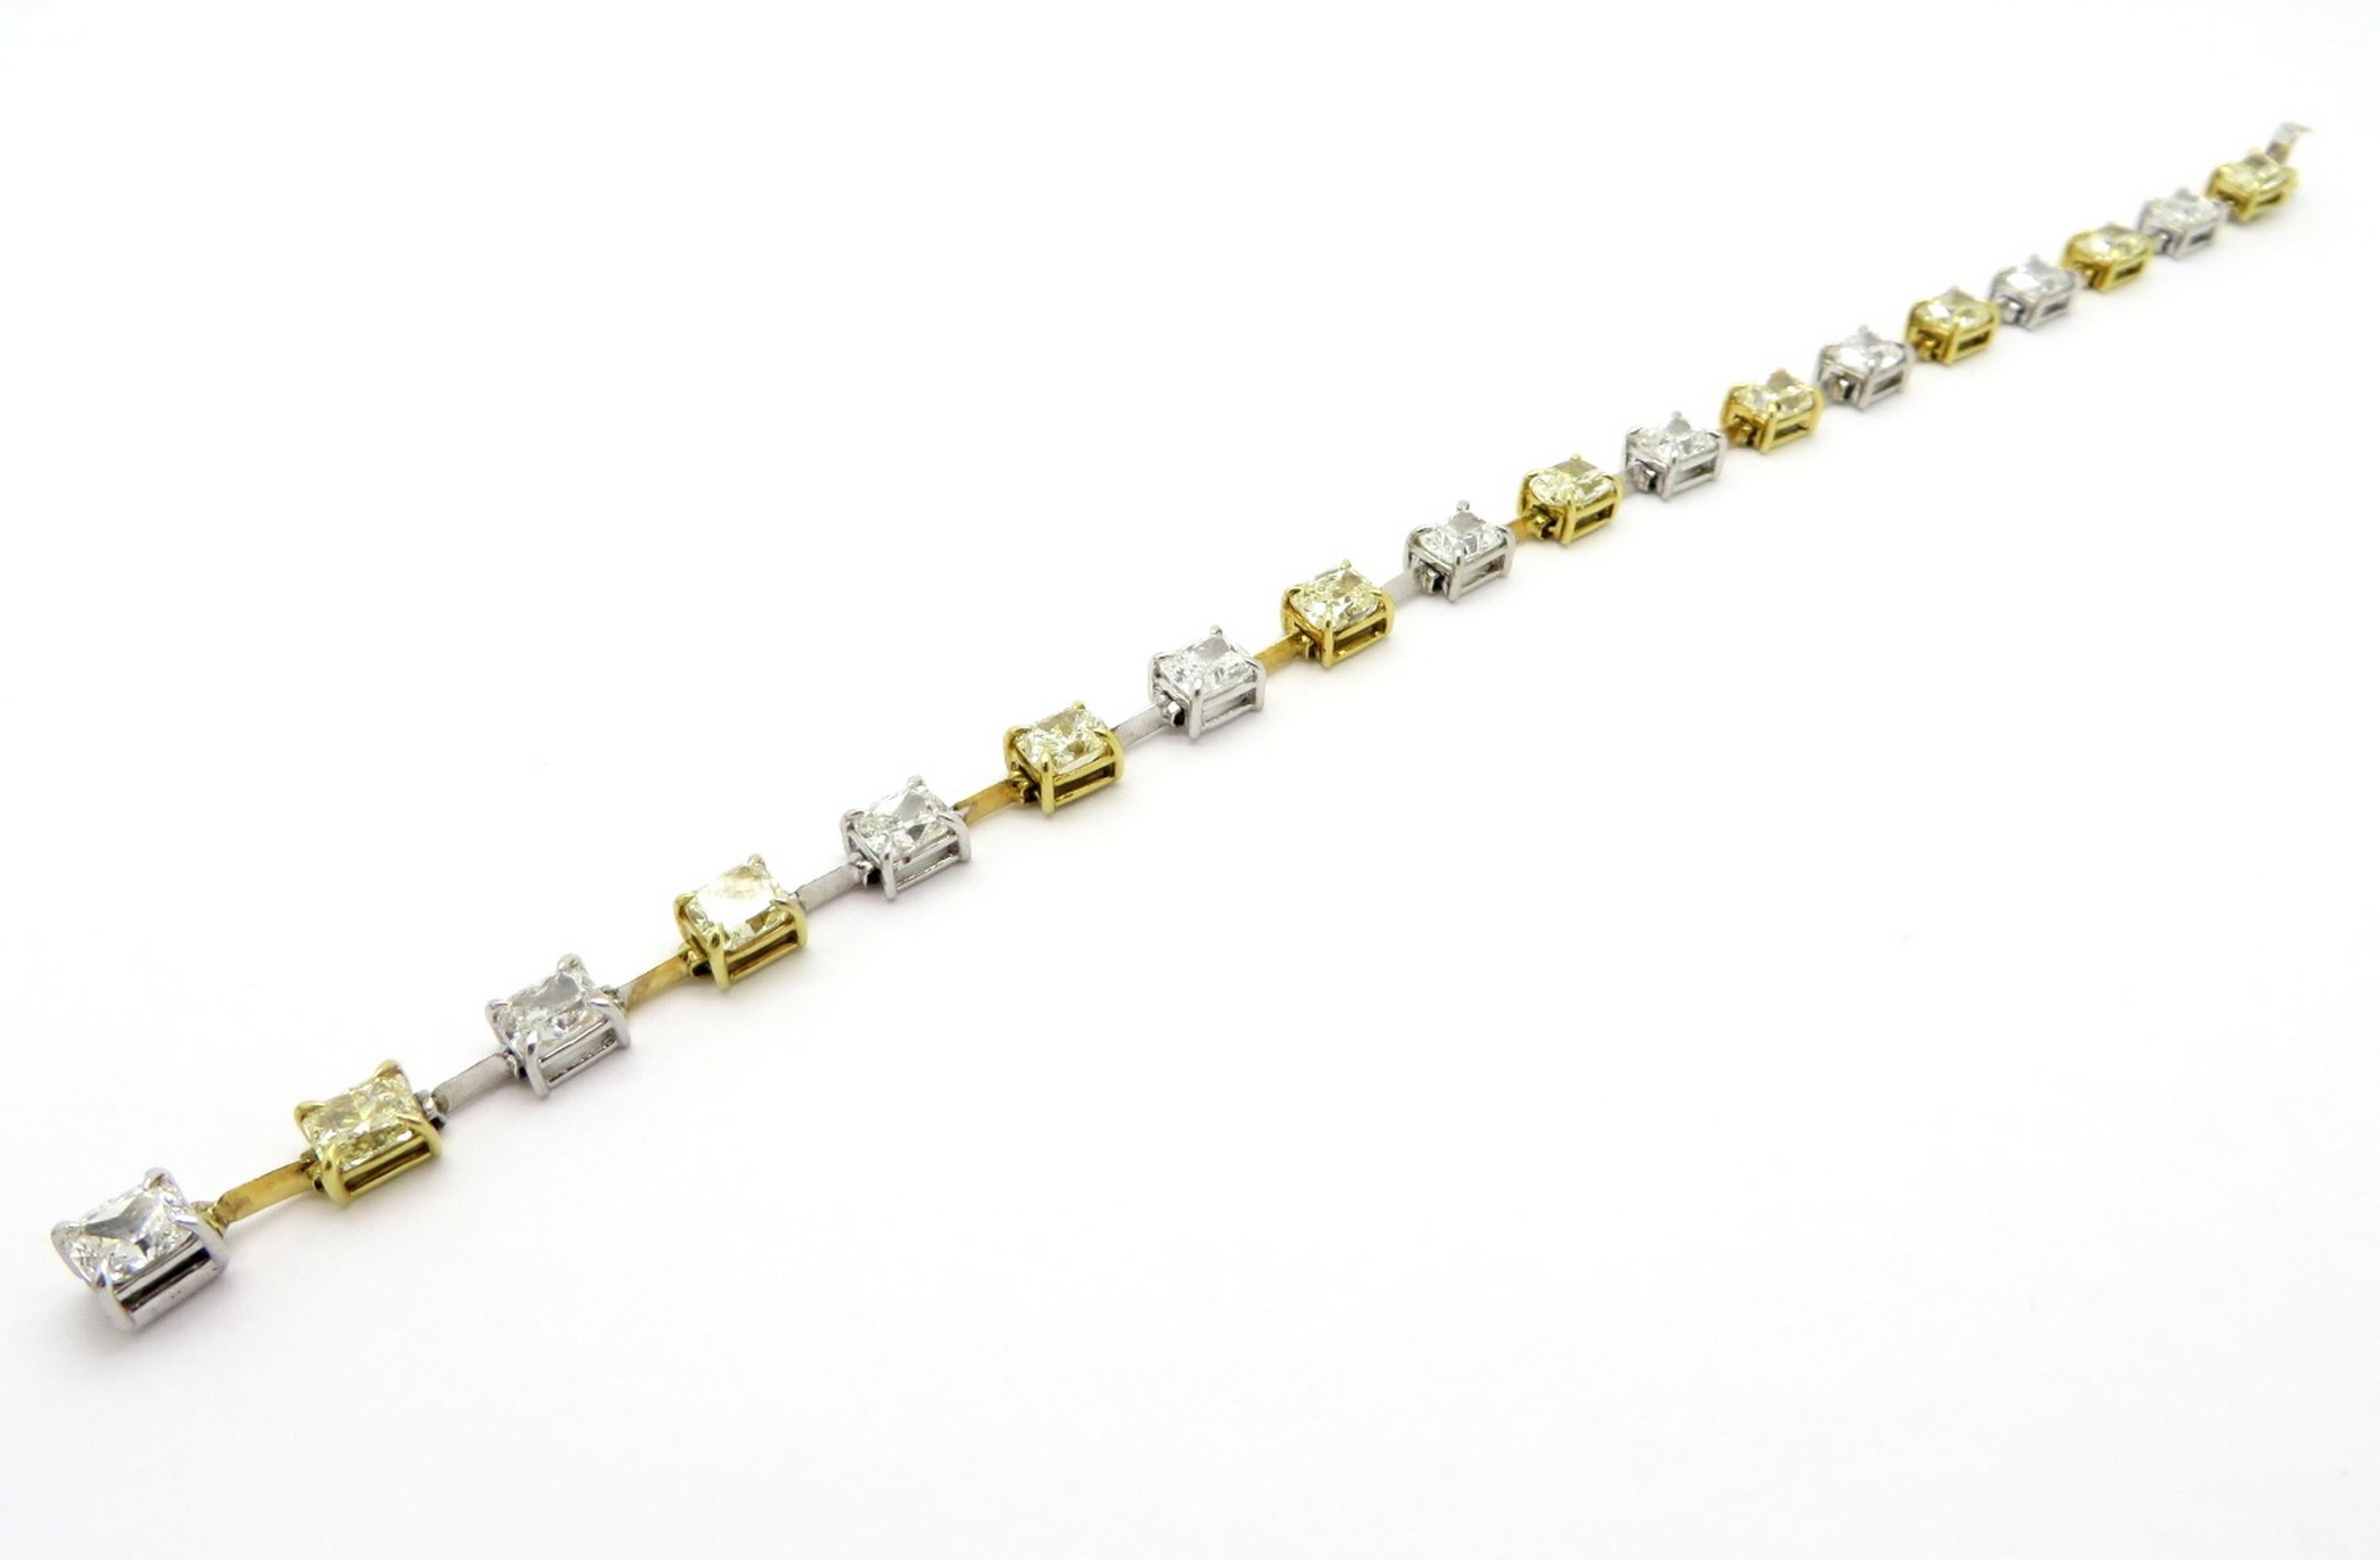 Platinum and 18K yellow and white gold cushion cut diamond fashion tennis bracelet. Showcasing nine cushion cut diamonds weighing approximately 4.92 carats having fancy yellow color and VS1 clarity. Interspersed with nine cushion cut diamonds